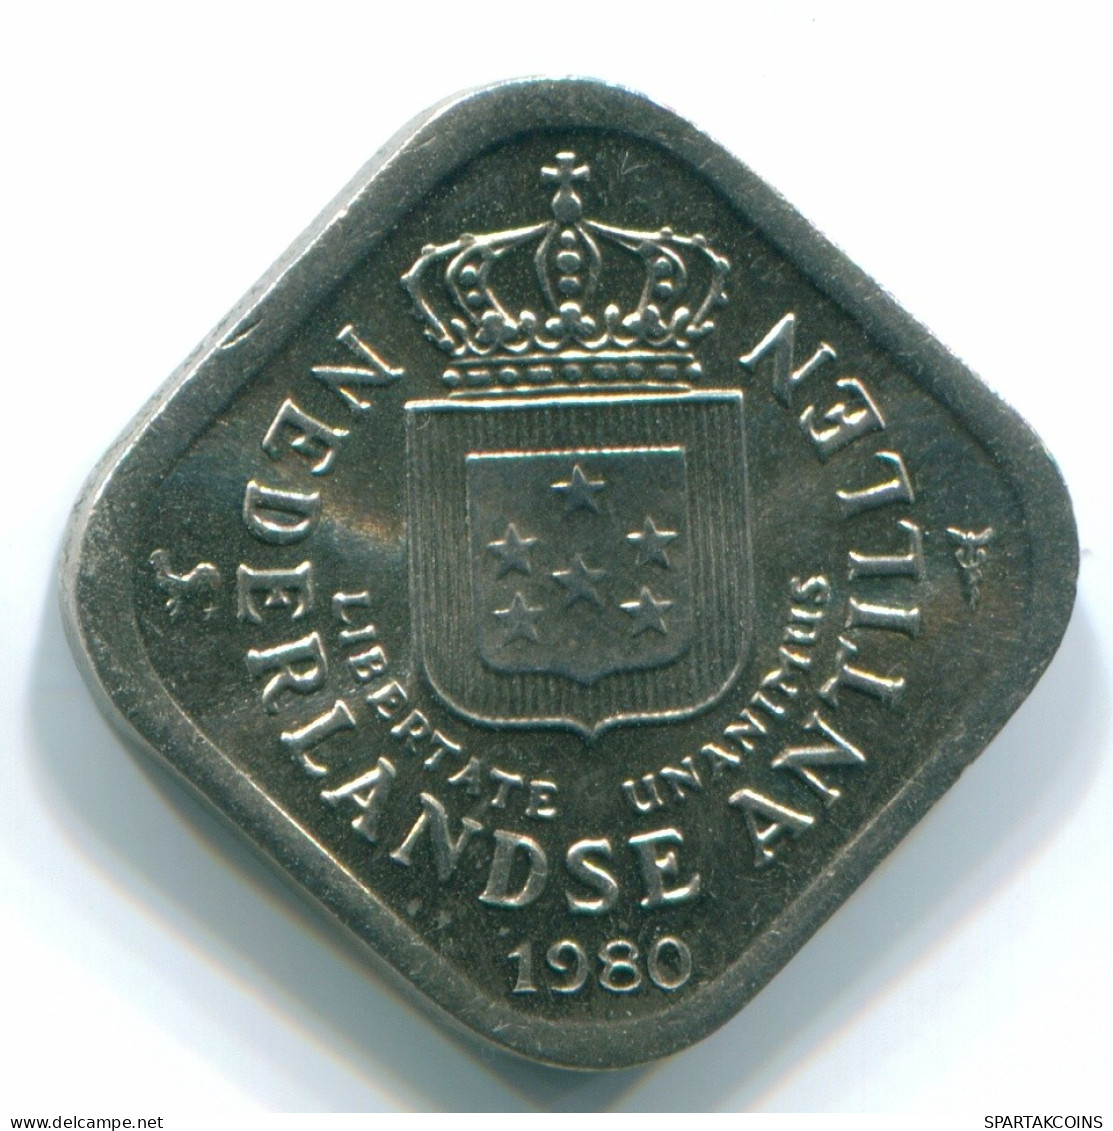 5 CENTS 1980 NETHERLANDS ANTILLES Nickel Colonial Coin #S12311.U.A - Antille Olandesi